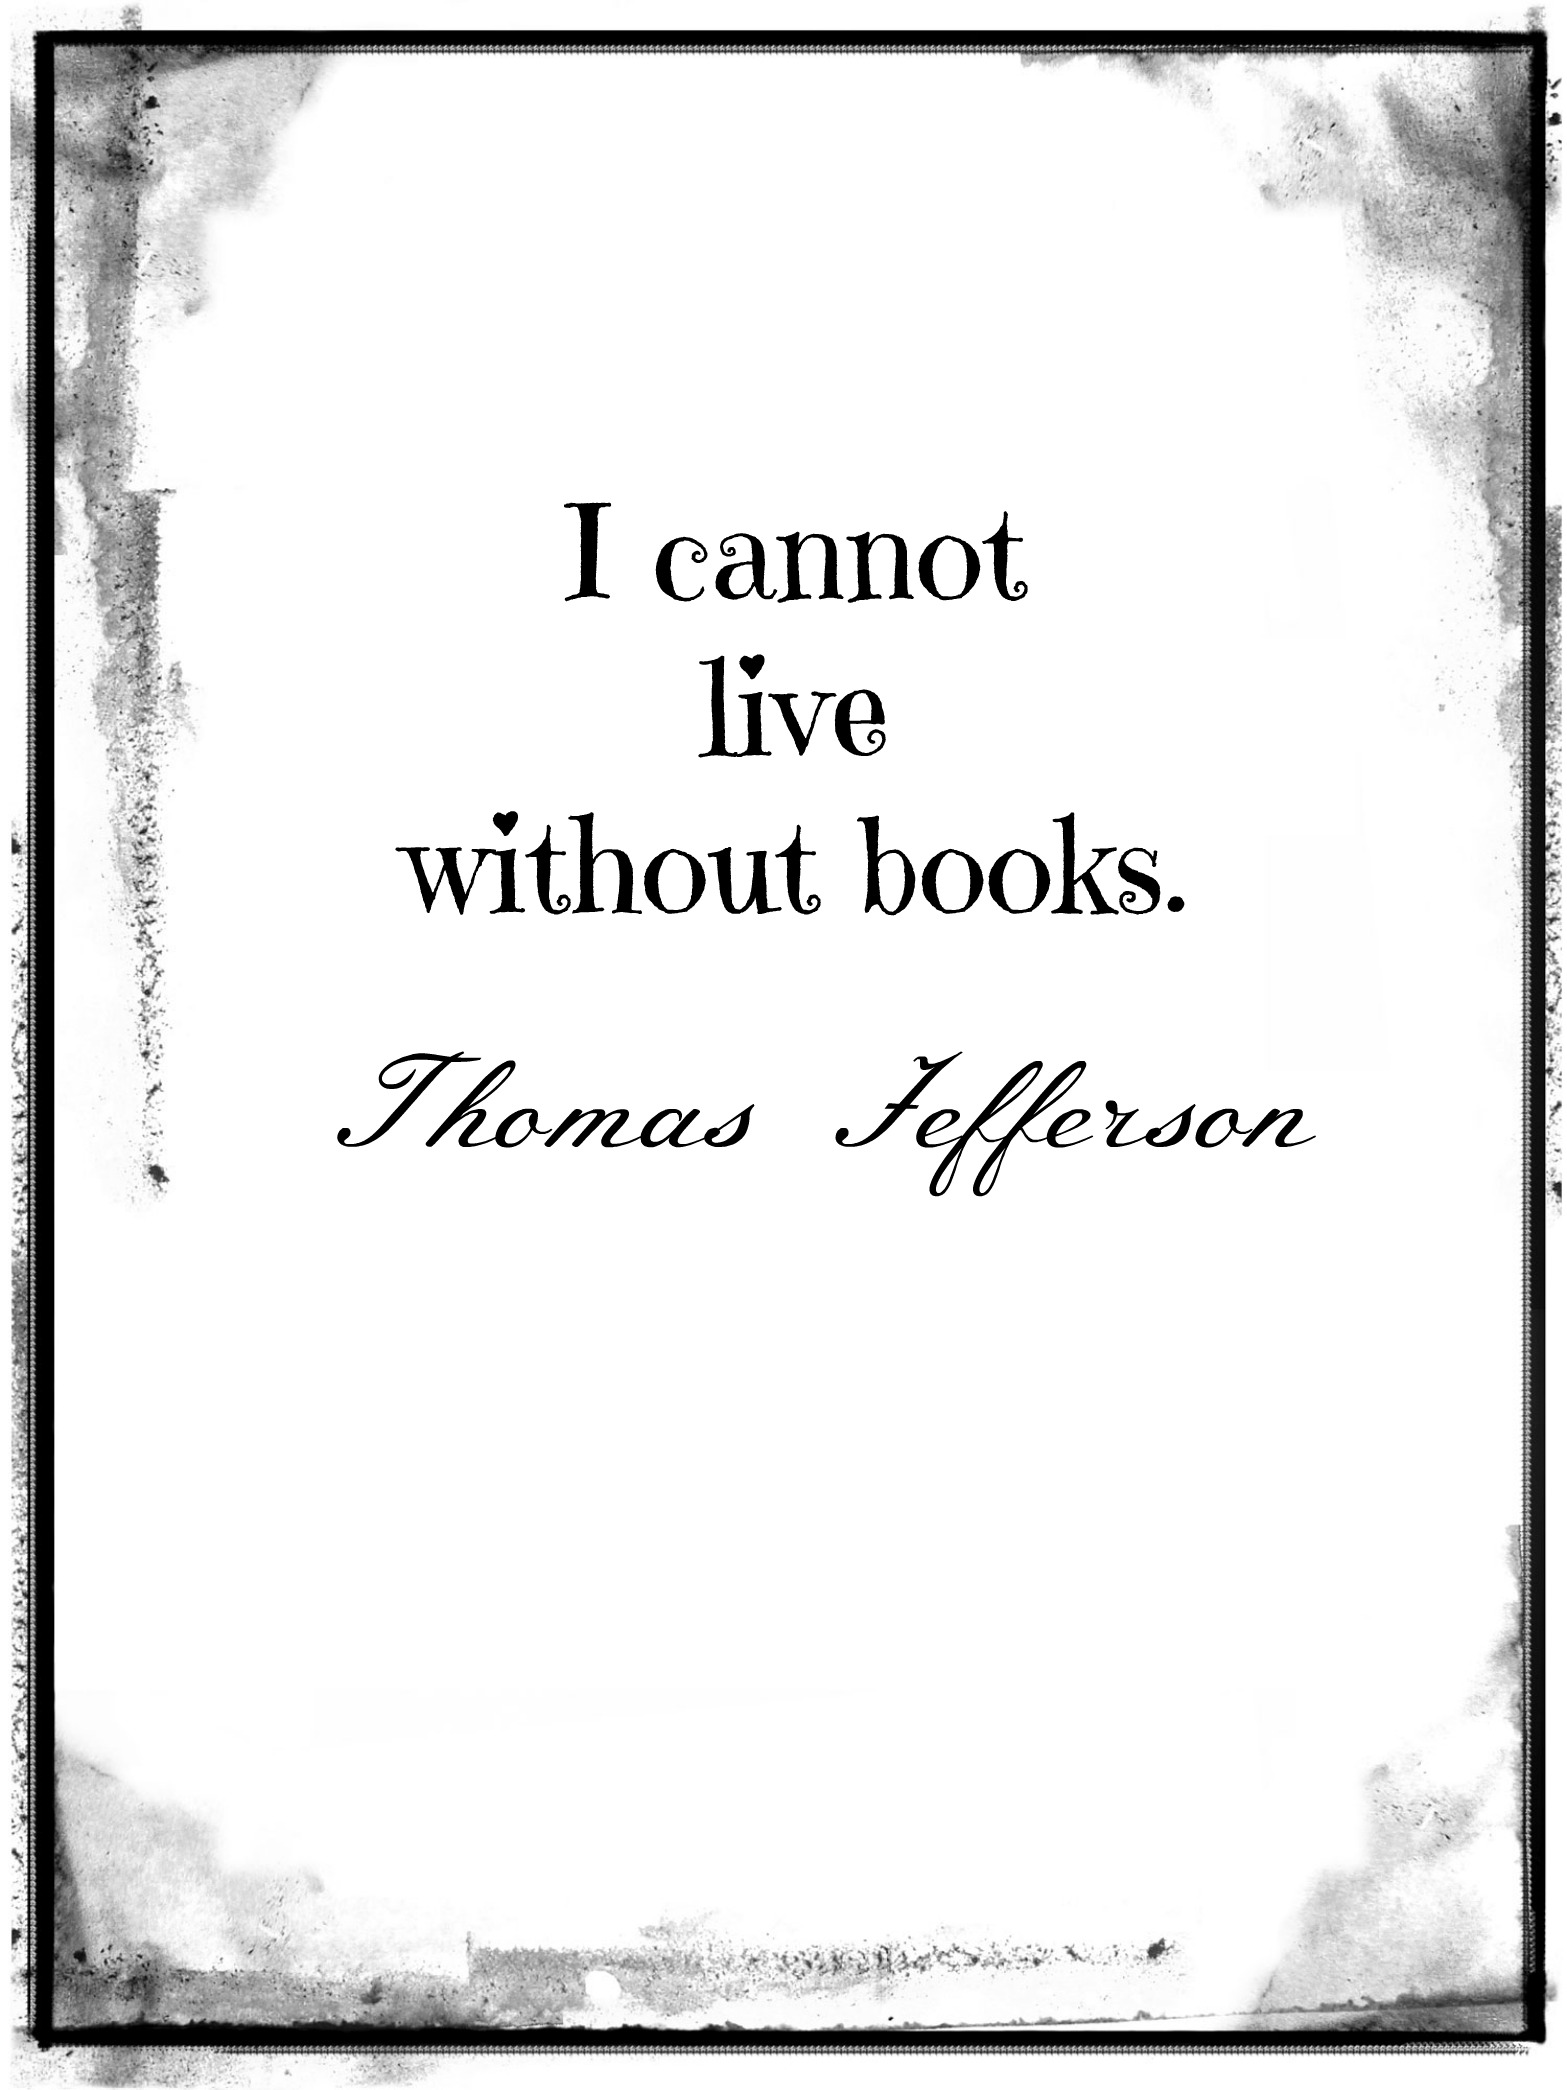 Quote about books by Thomas Jefferson